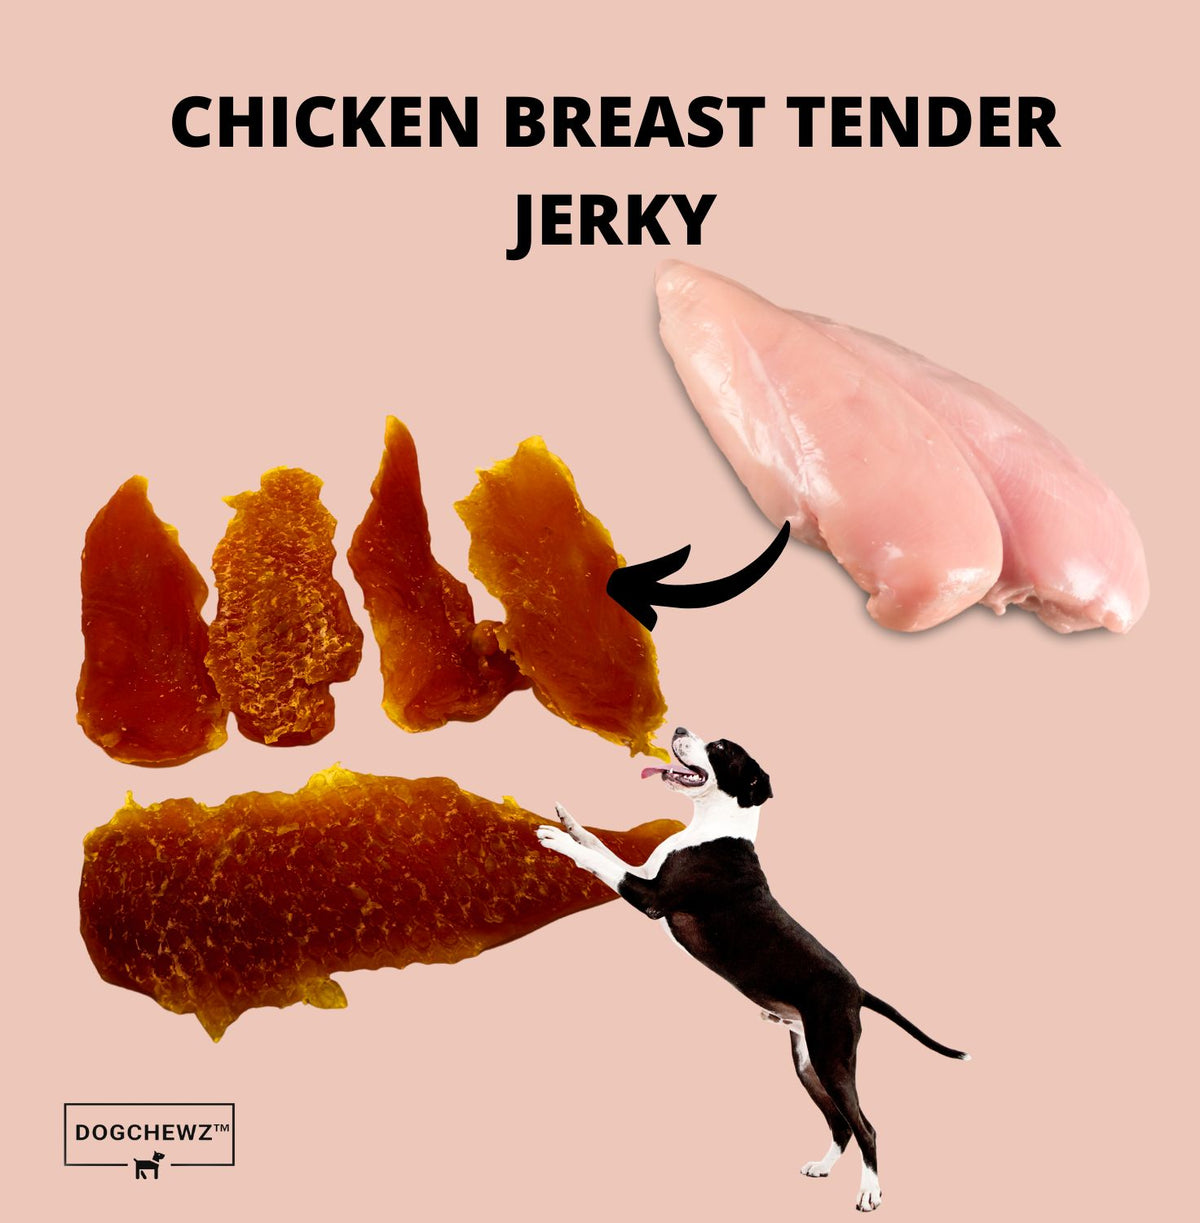 DOGCHEWZ™ Chicken Breast Tender Jerky for Dogs of All Sizes